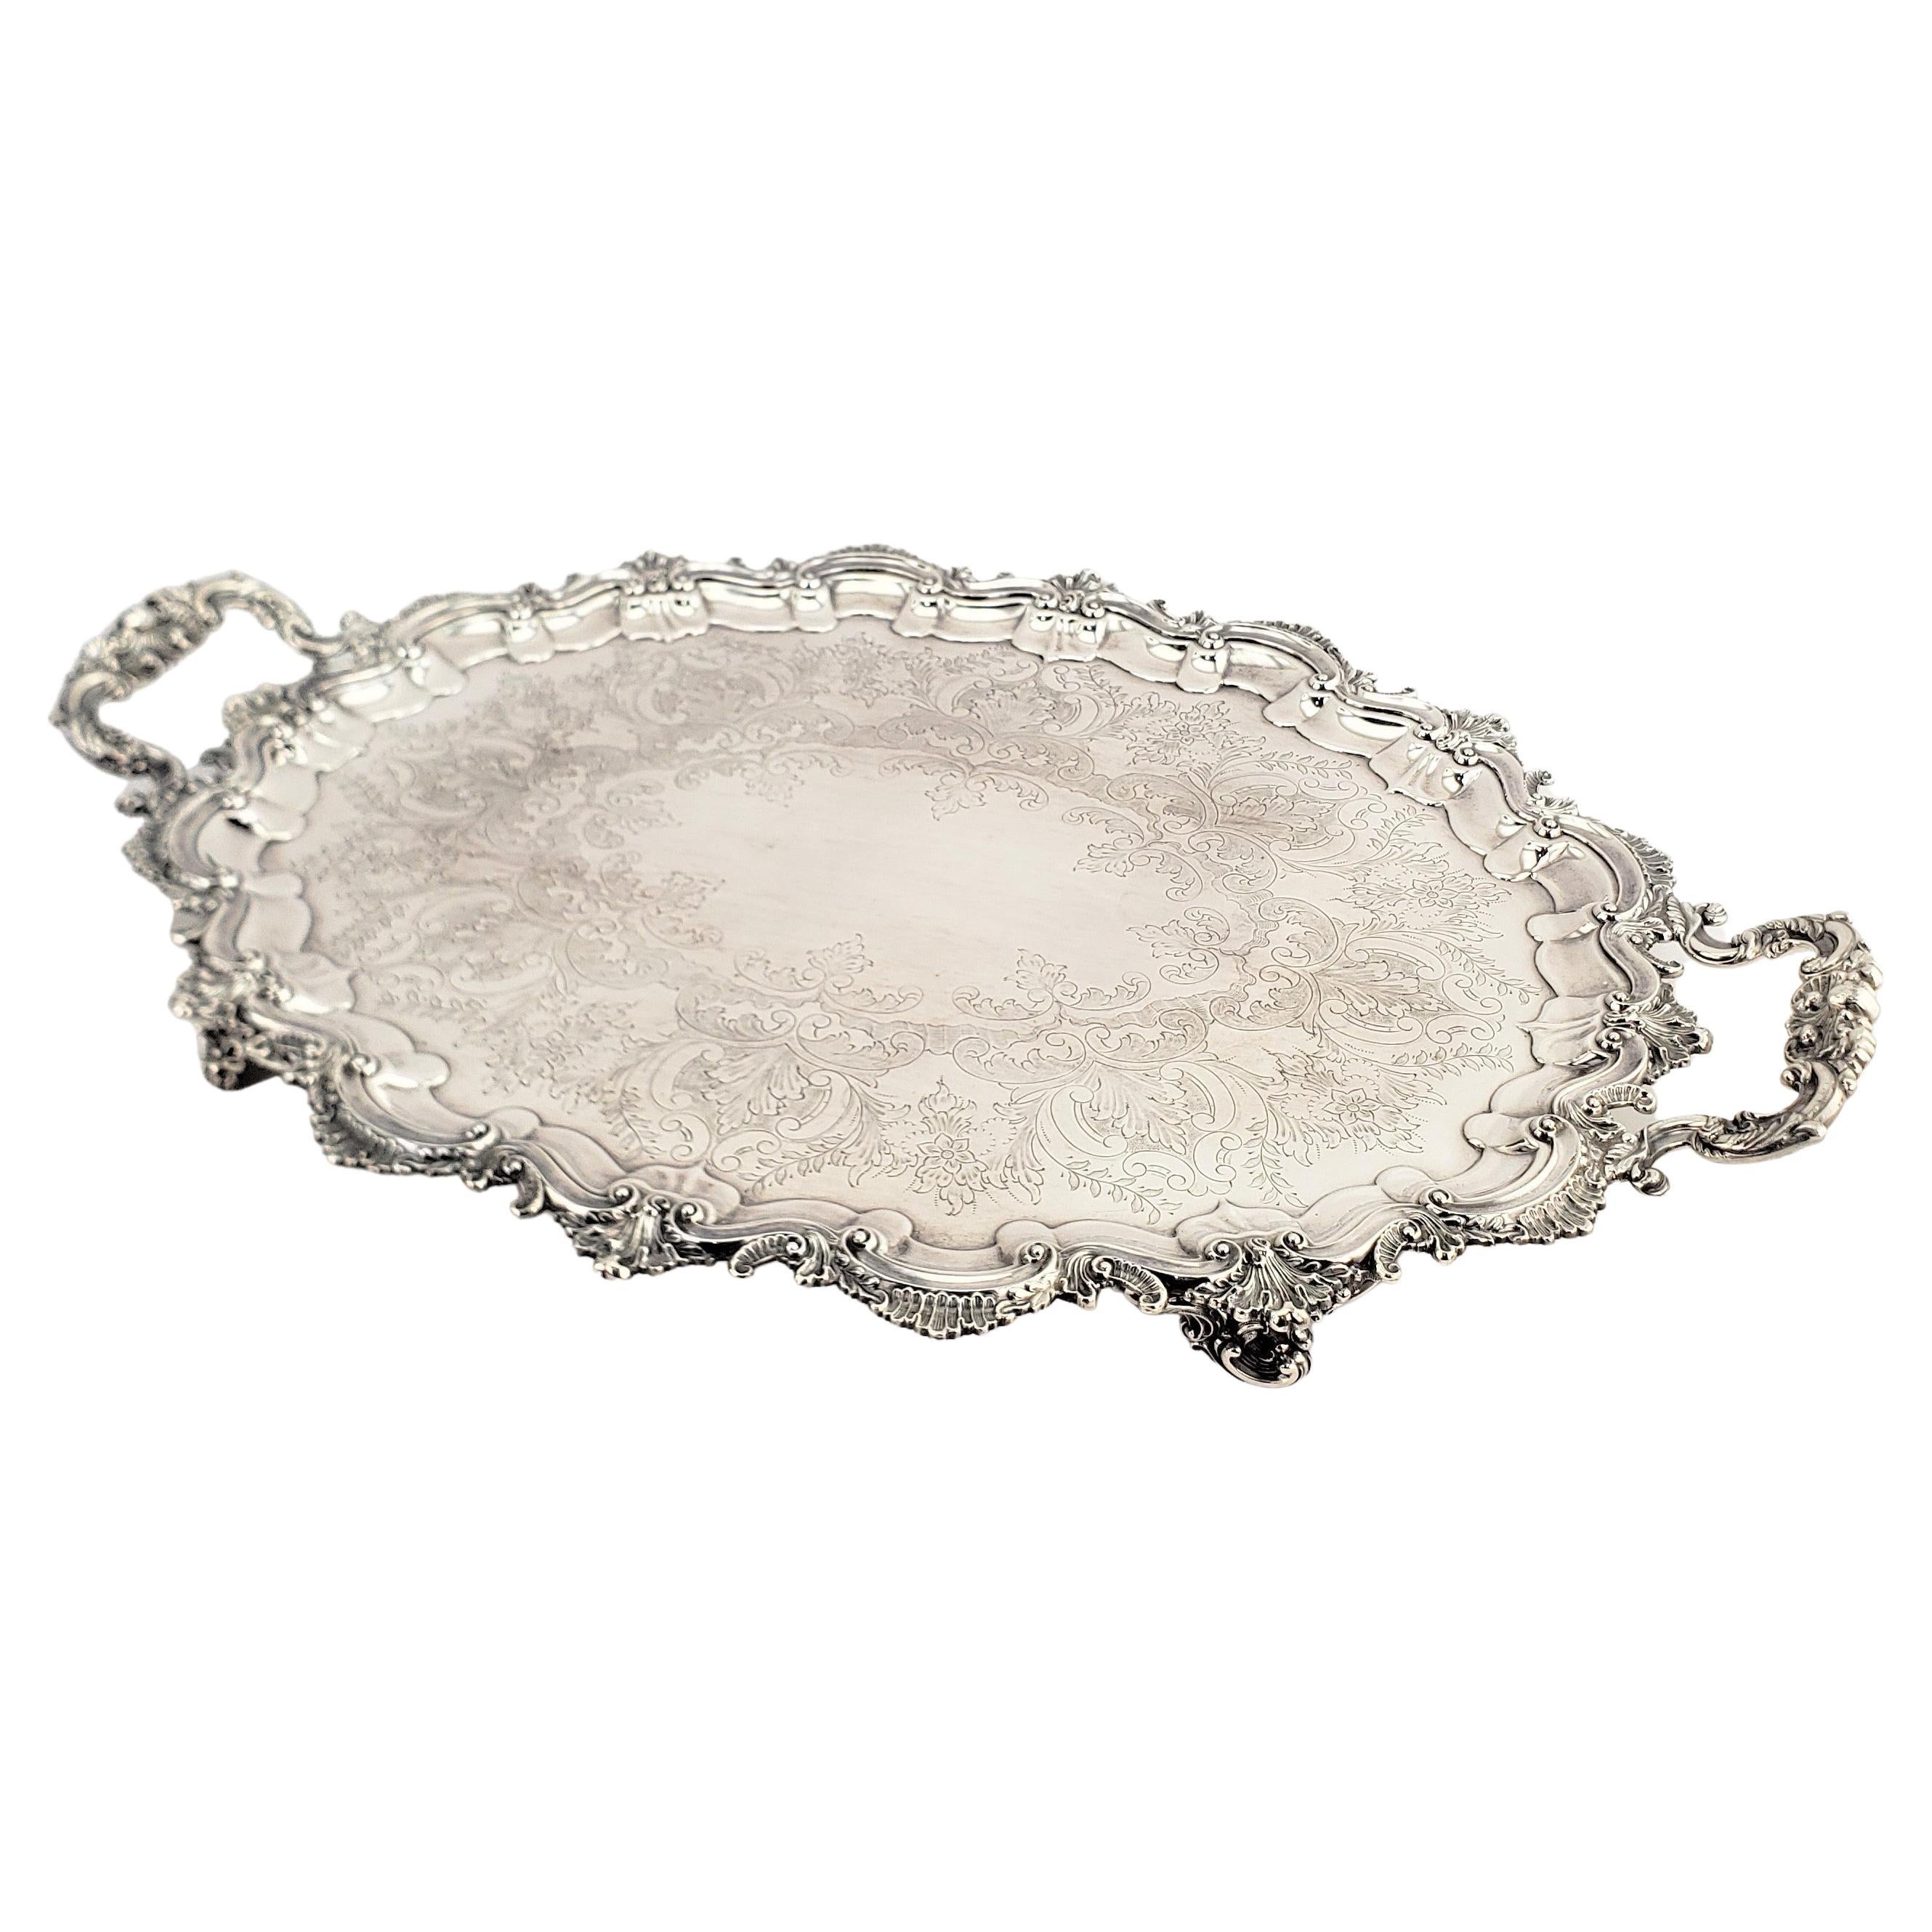 Large Antique English Footed Silver Plated Serving Tray with Floral Decoration